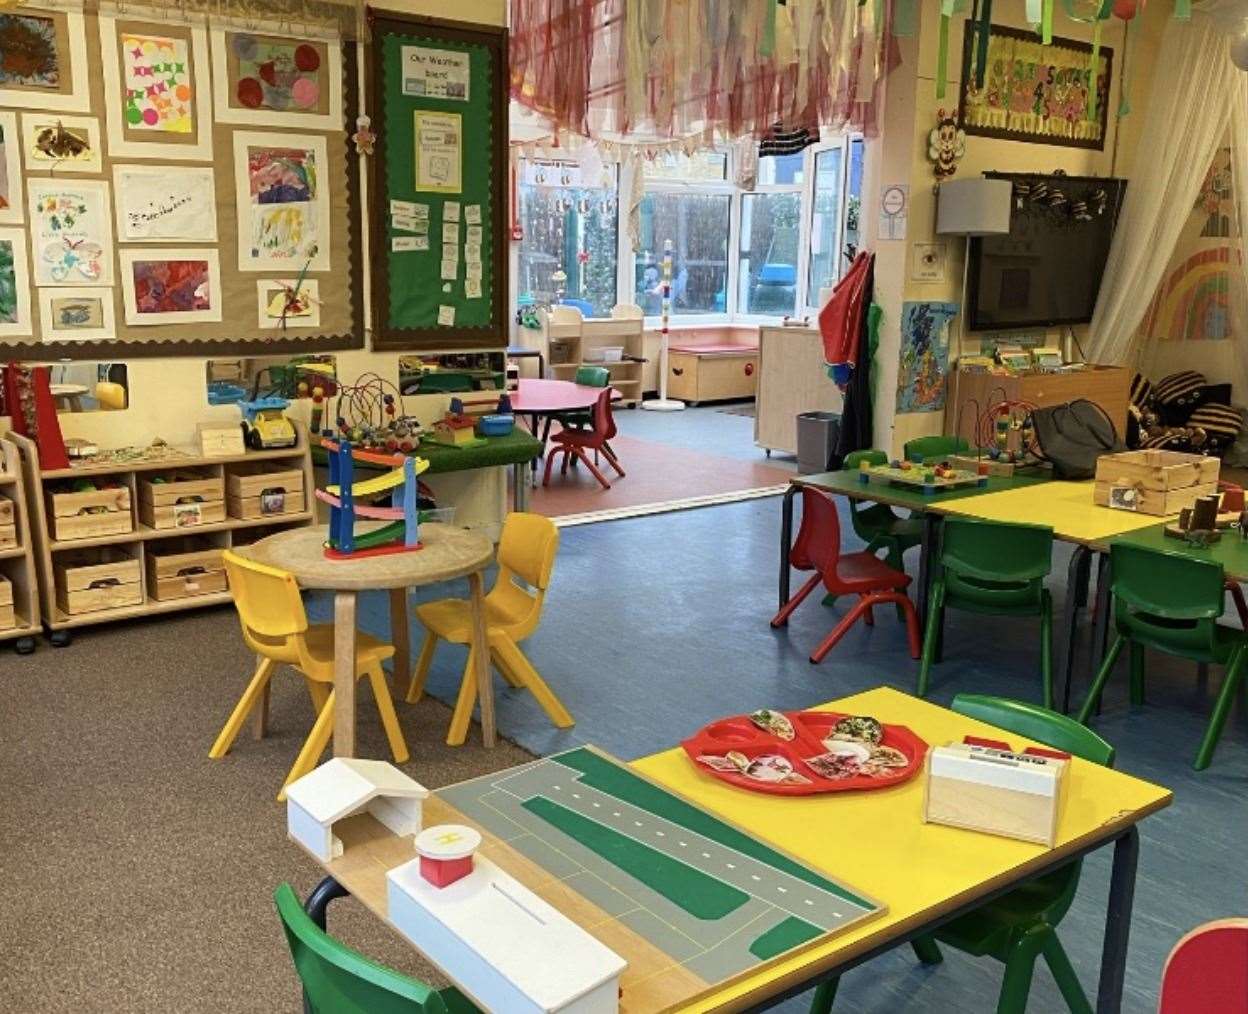 Ms Antoniou says she was unable to set up the room the previous day like she normally does before the unexpected Ofsted visit to the Broadstairs nursery. Photo: Curious Explorers